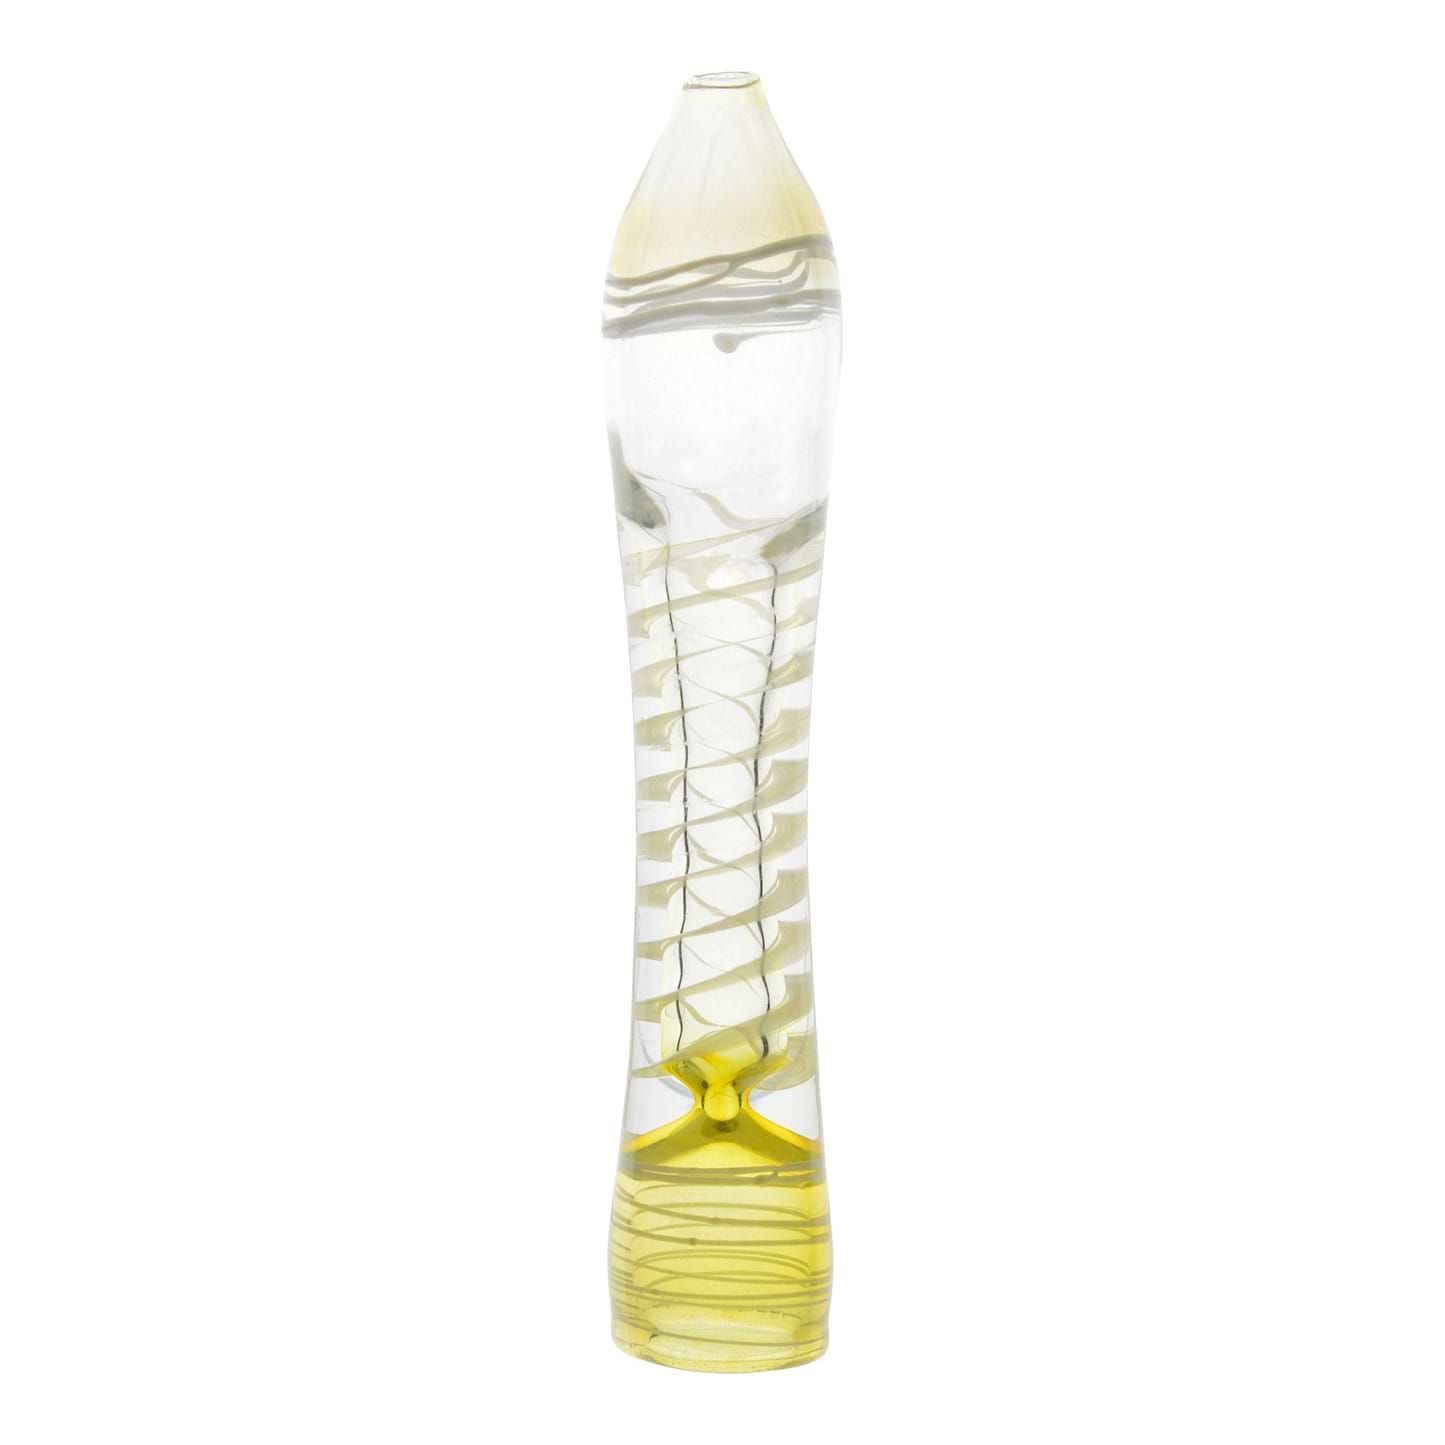 Easy-to-hold 3.5-inch compact multicolored glass oney smoking device glass pipe one hitter